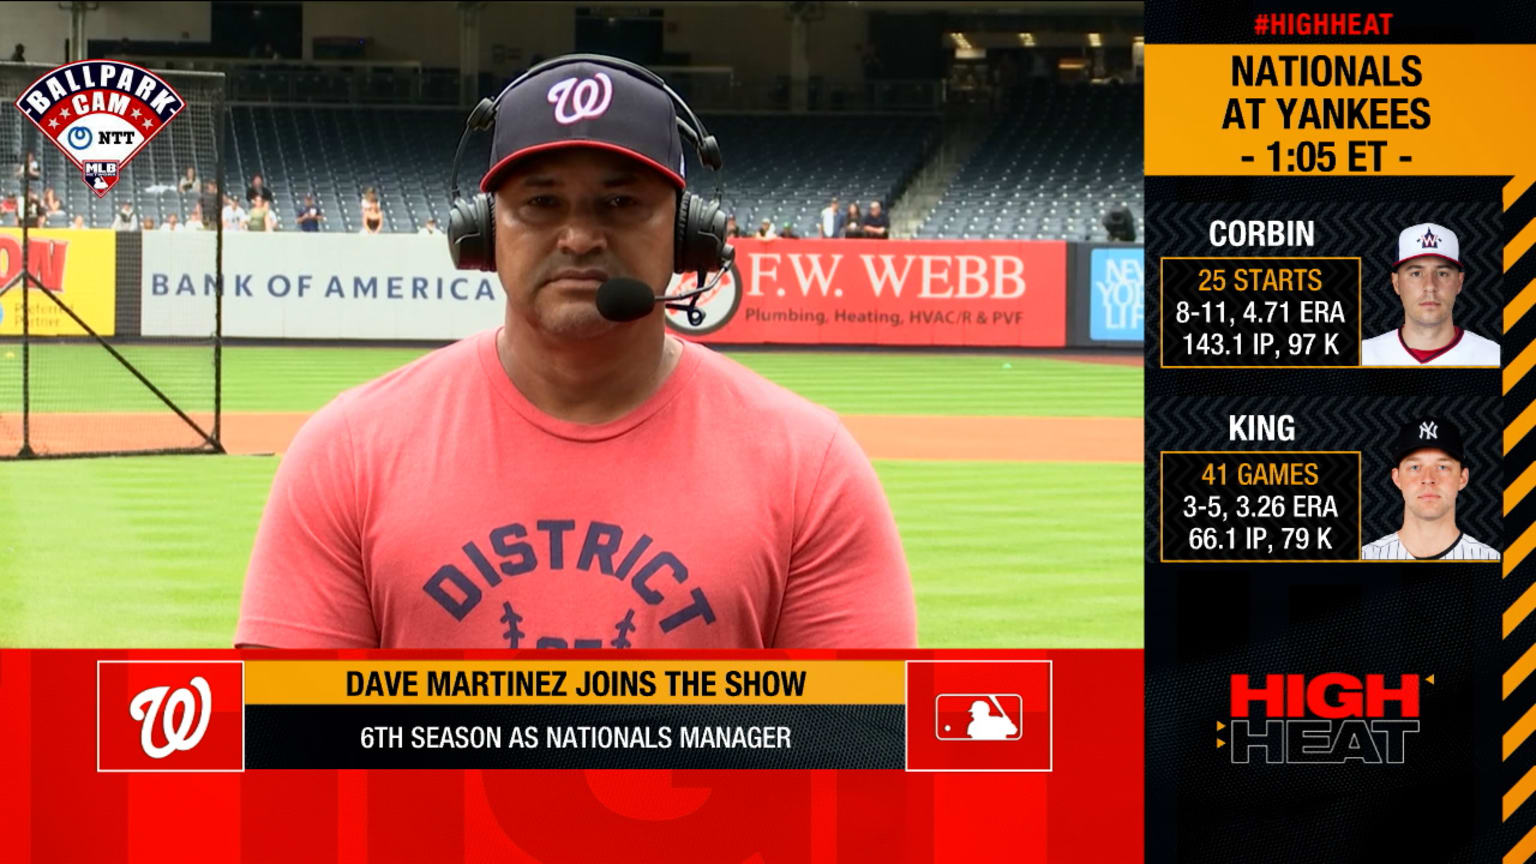 Dave Martinez agrees to contract extension with the Nationals